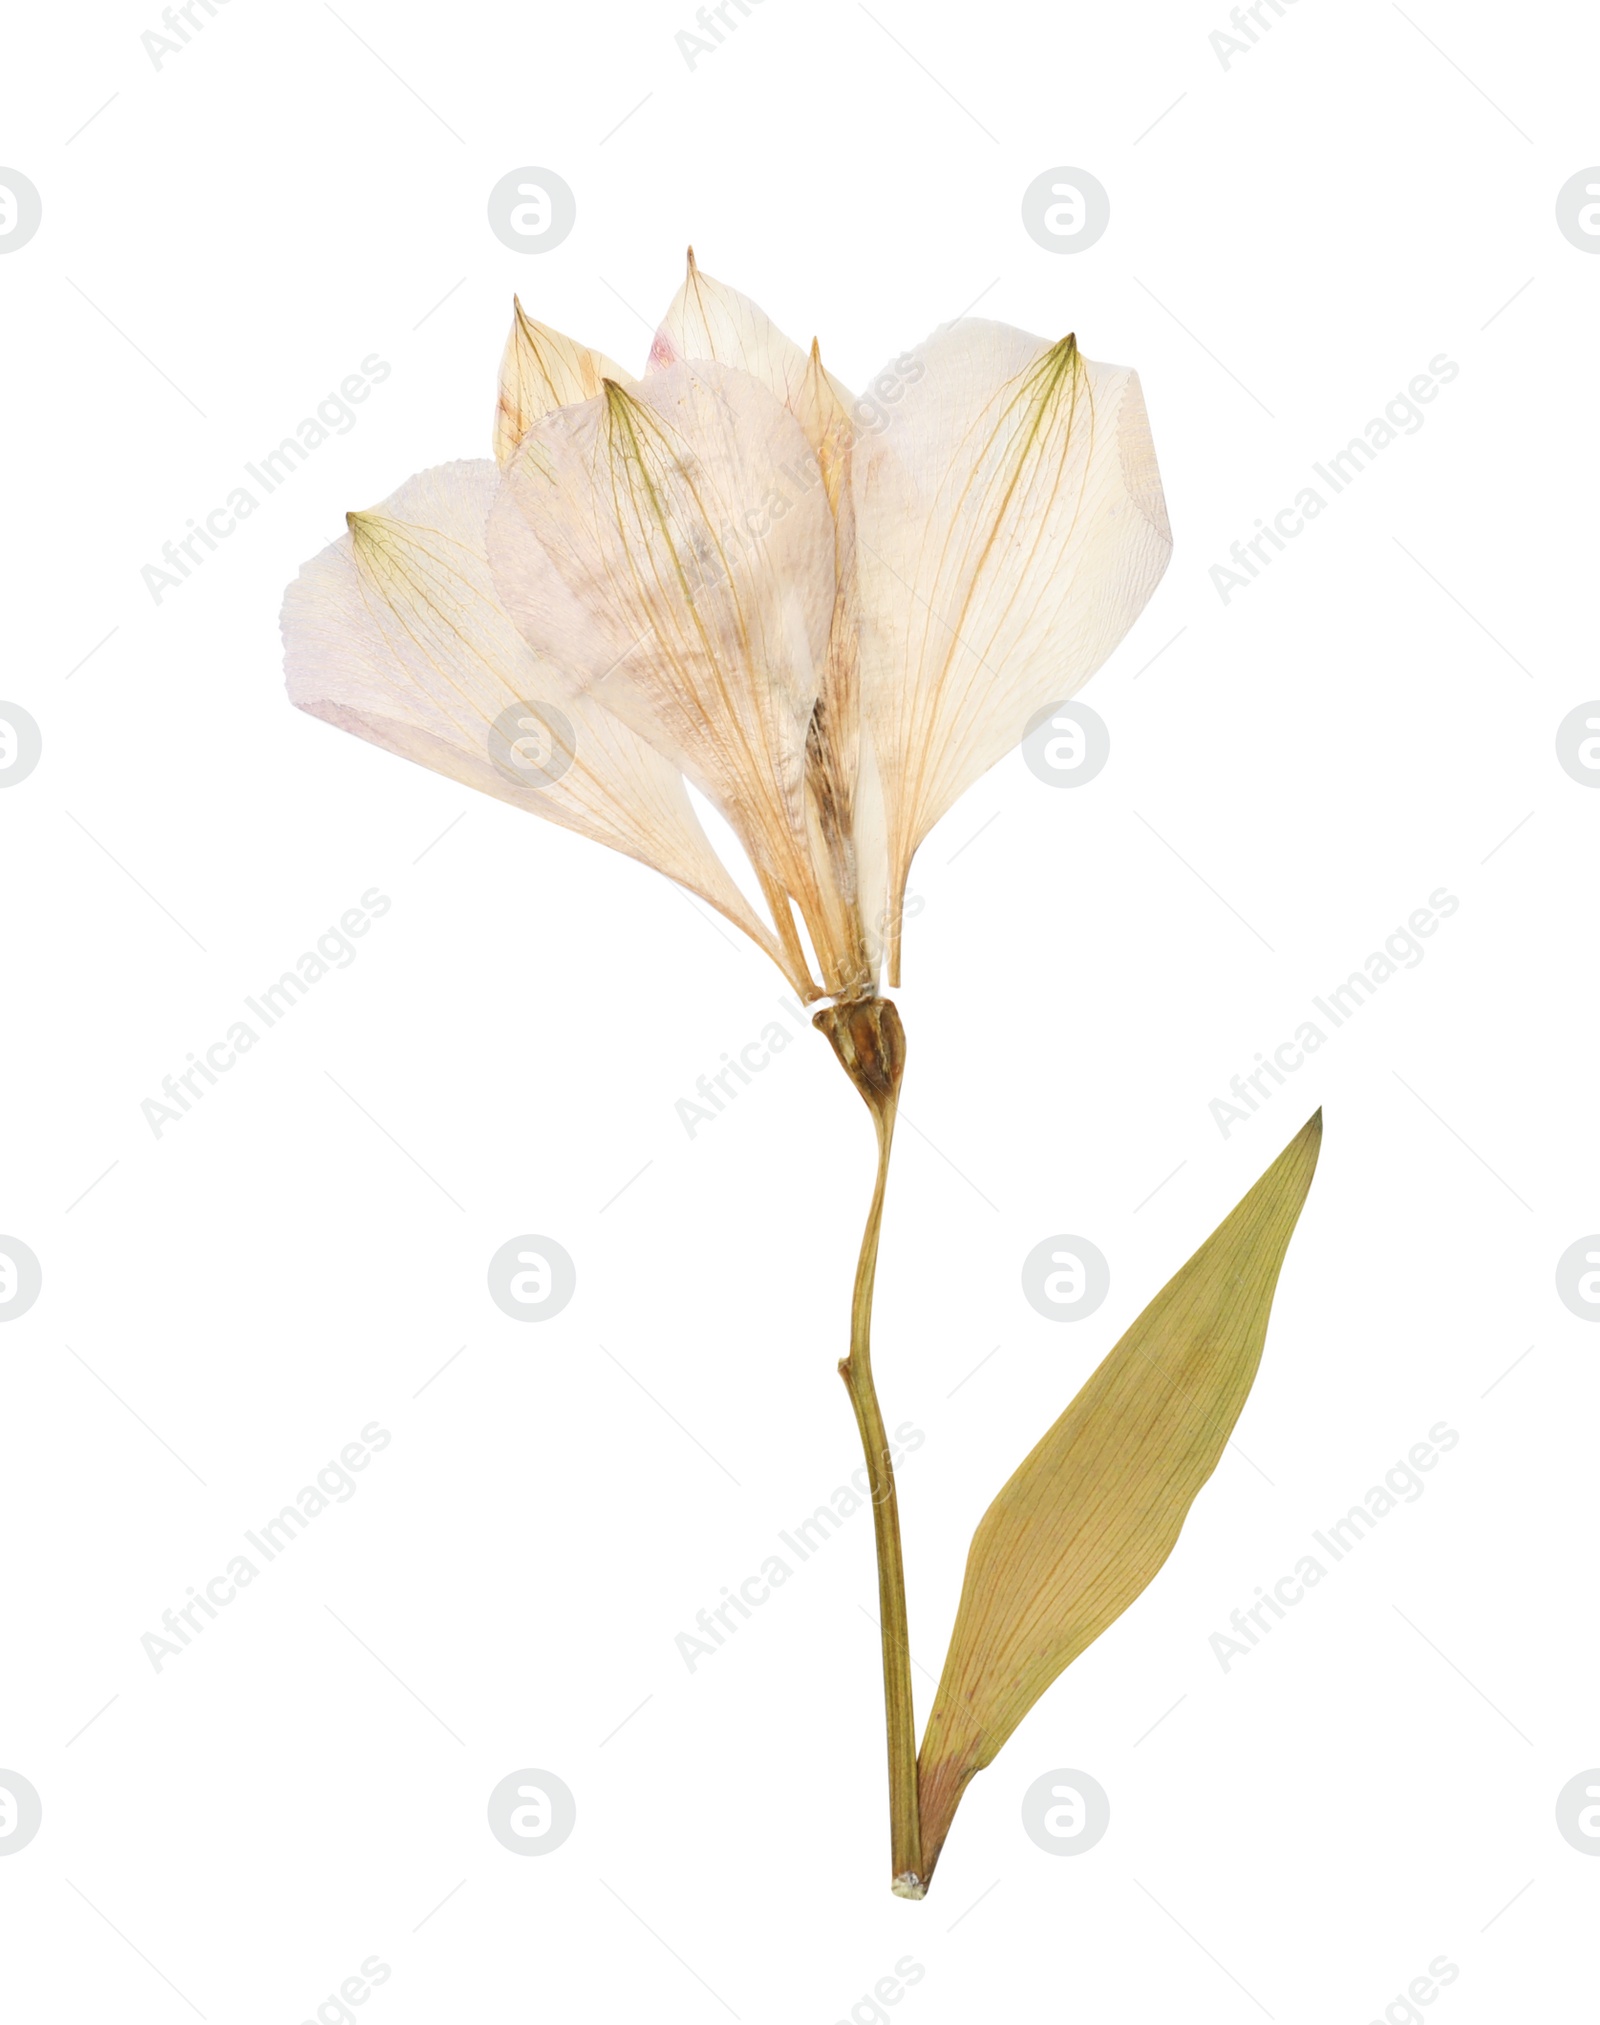 Photo of Wild dried meadow flower on white background, top view